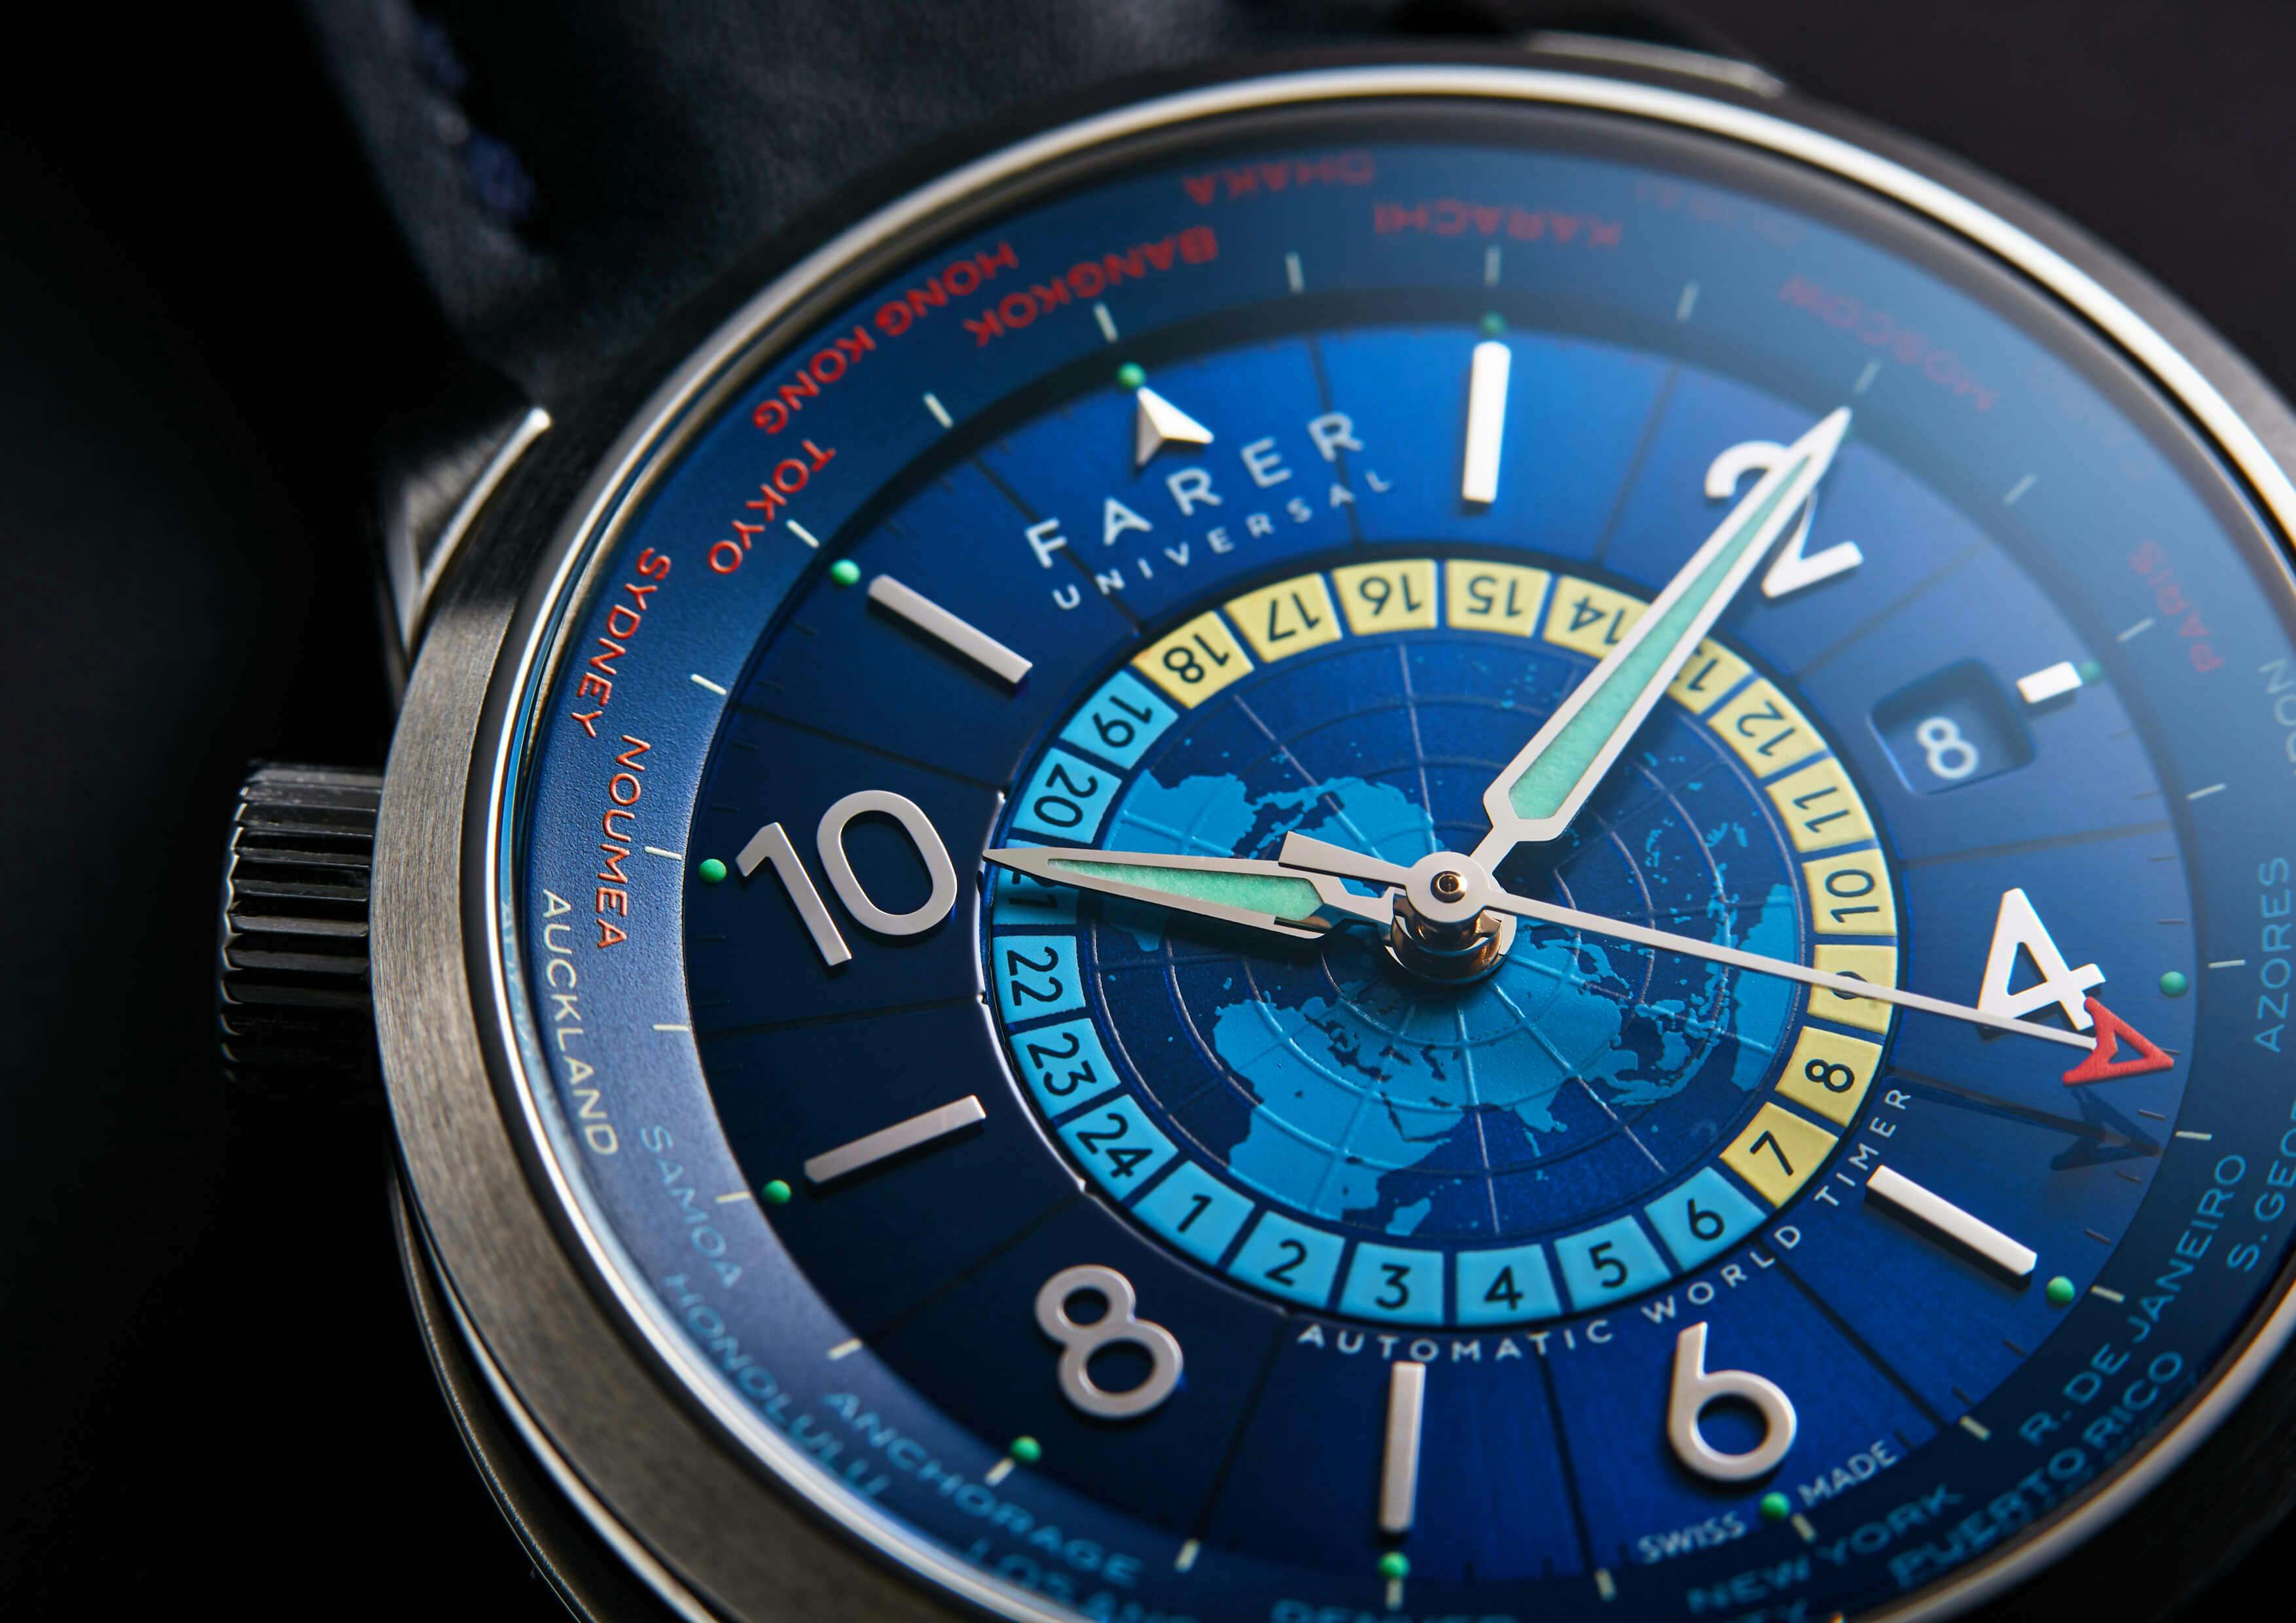 farer watches image montage shot